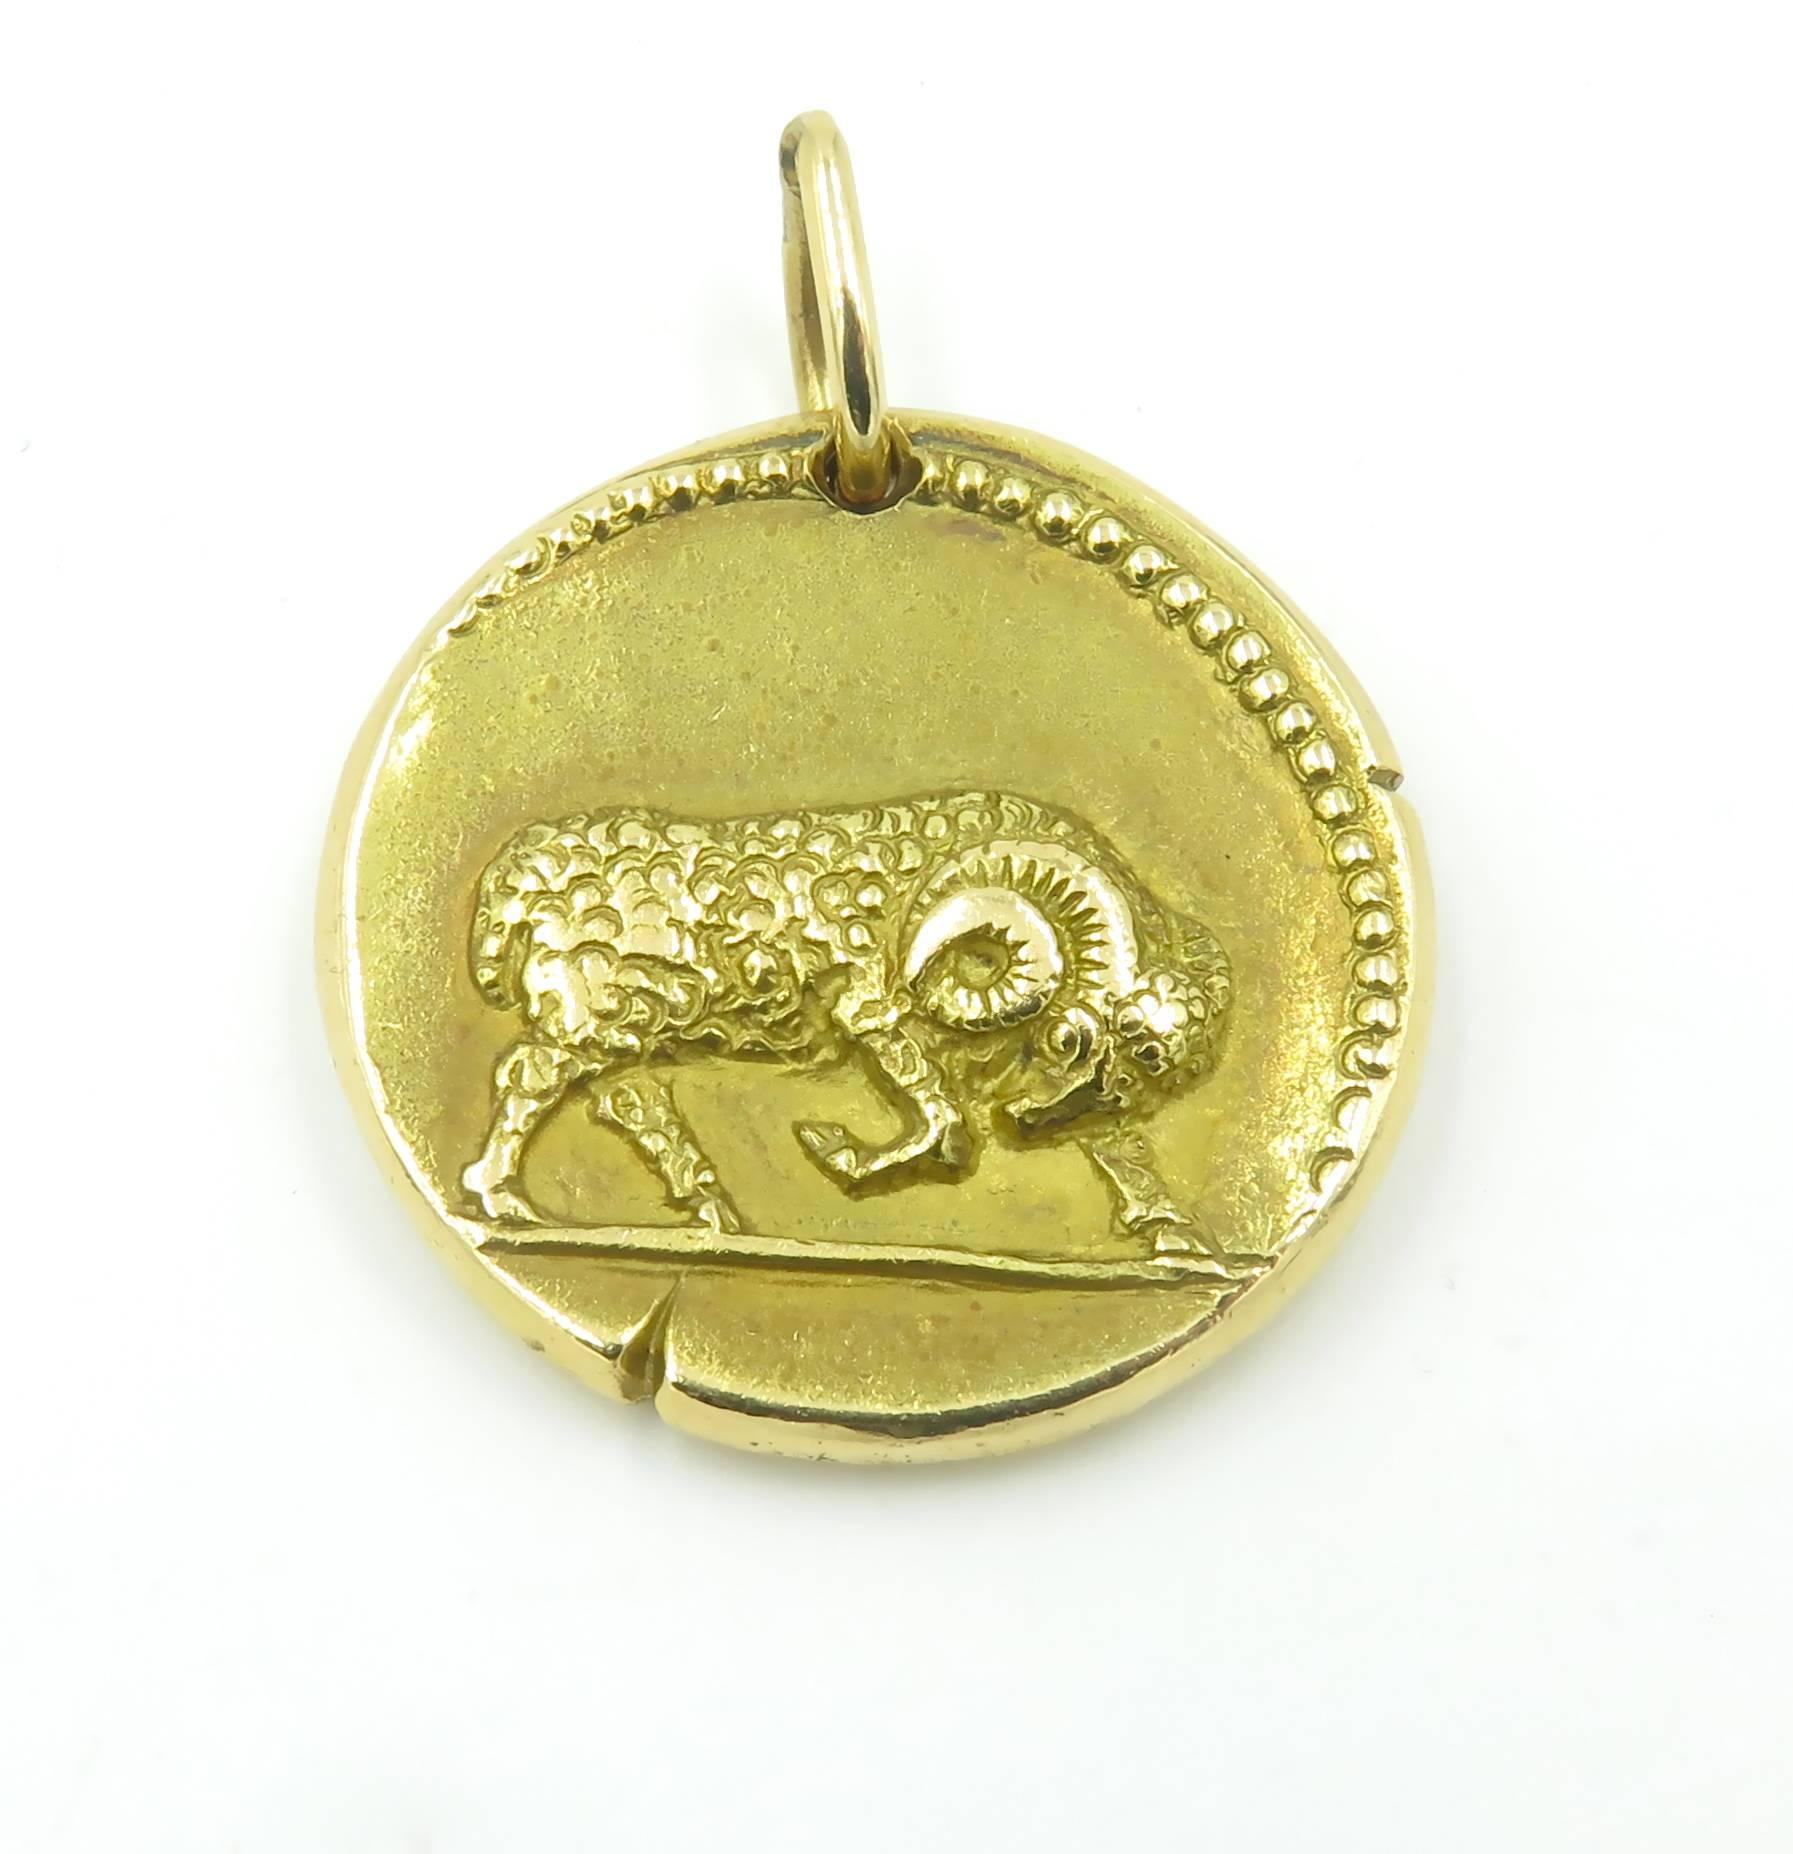 An 18 karat yellow gold zodiac pendant representing the astrological sign for Aries.  Signed Van Cleef and Arpels serial number 16V5162.  Measuring approximately 26.5mm in diameter with an approximate gross weight of 19.2 grams.